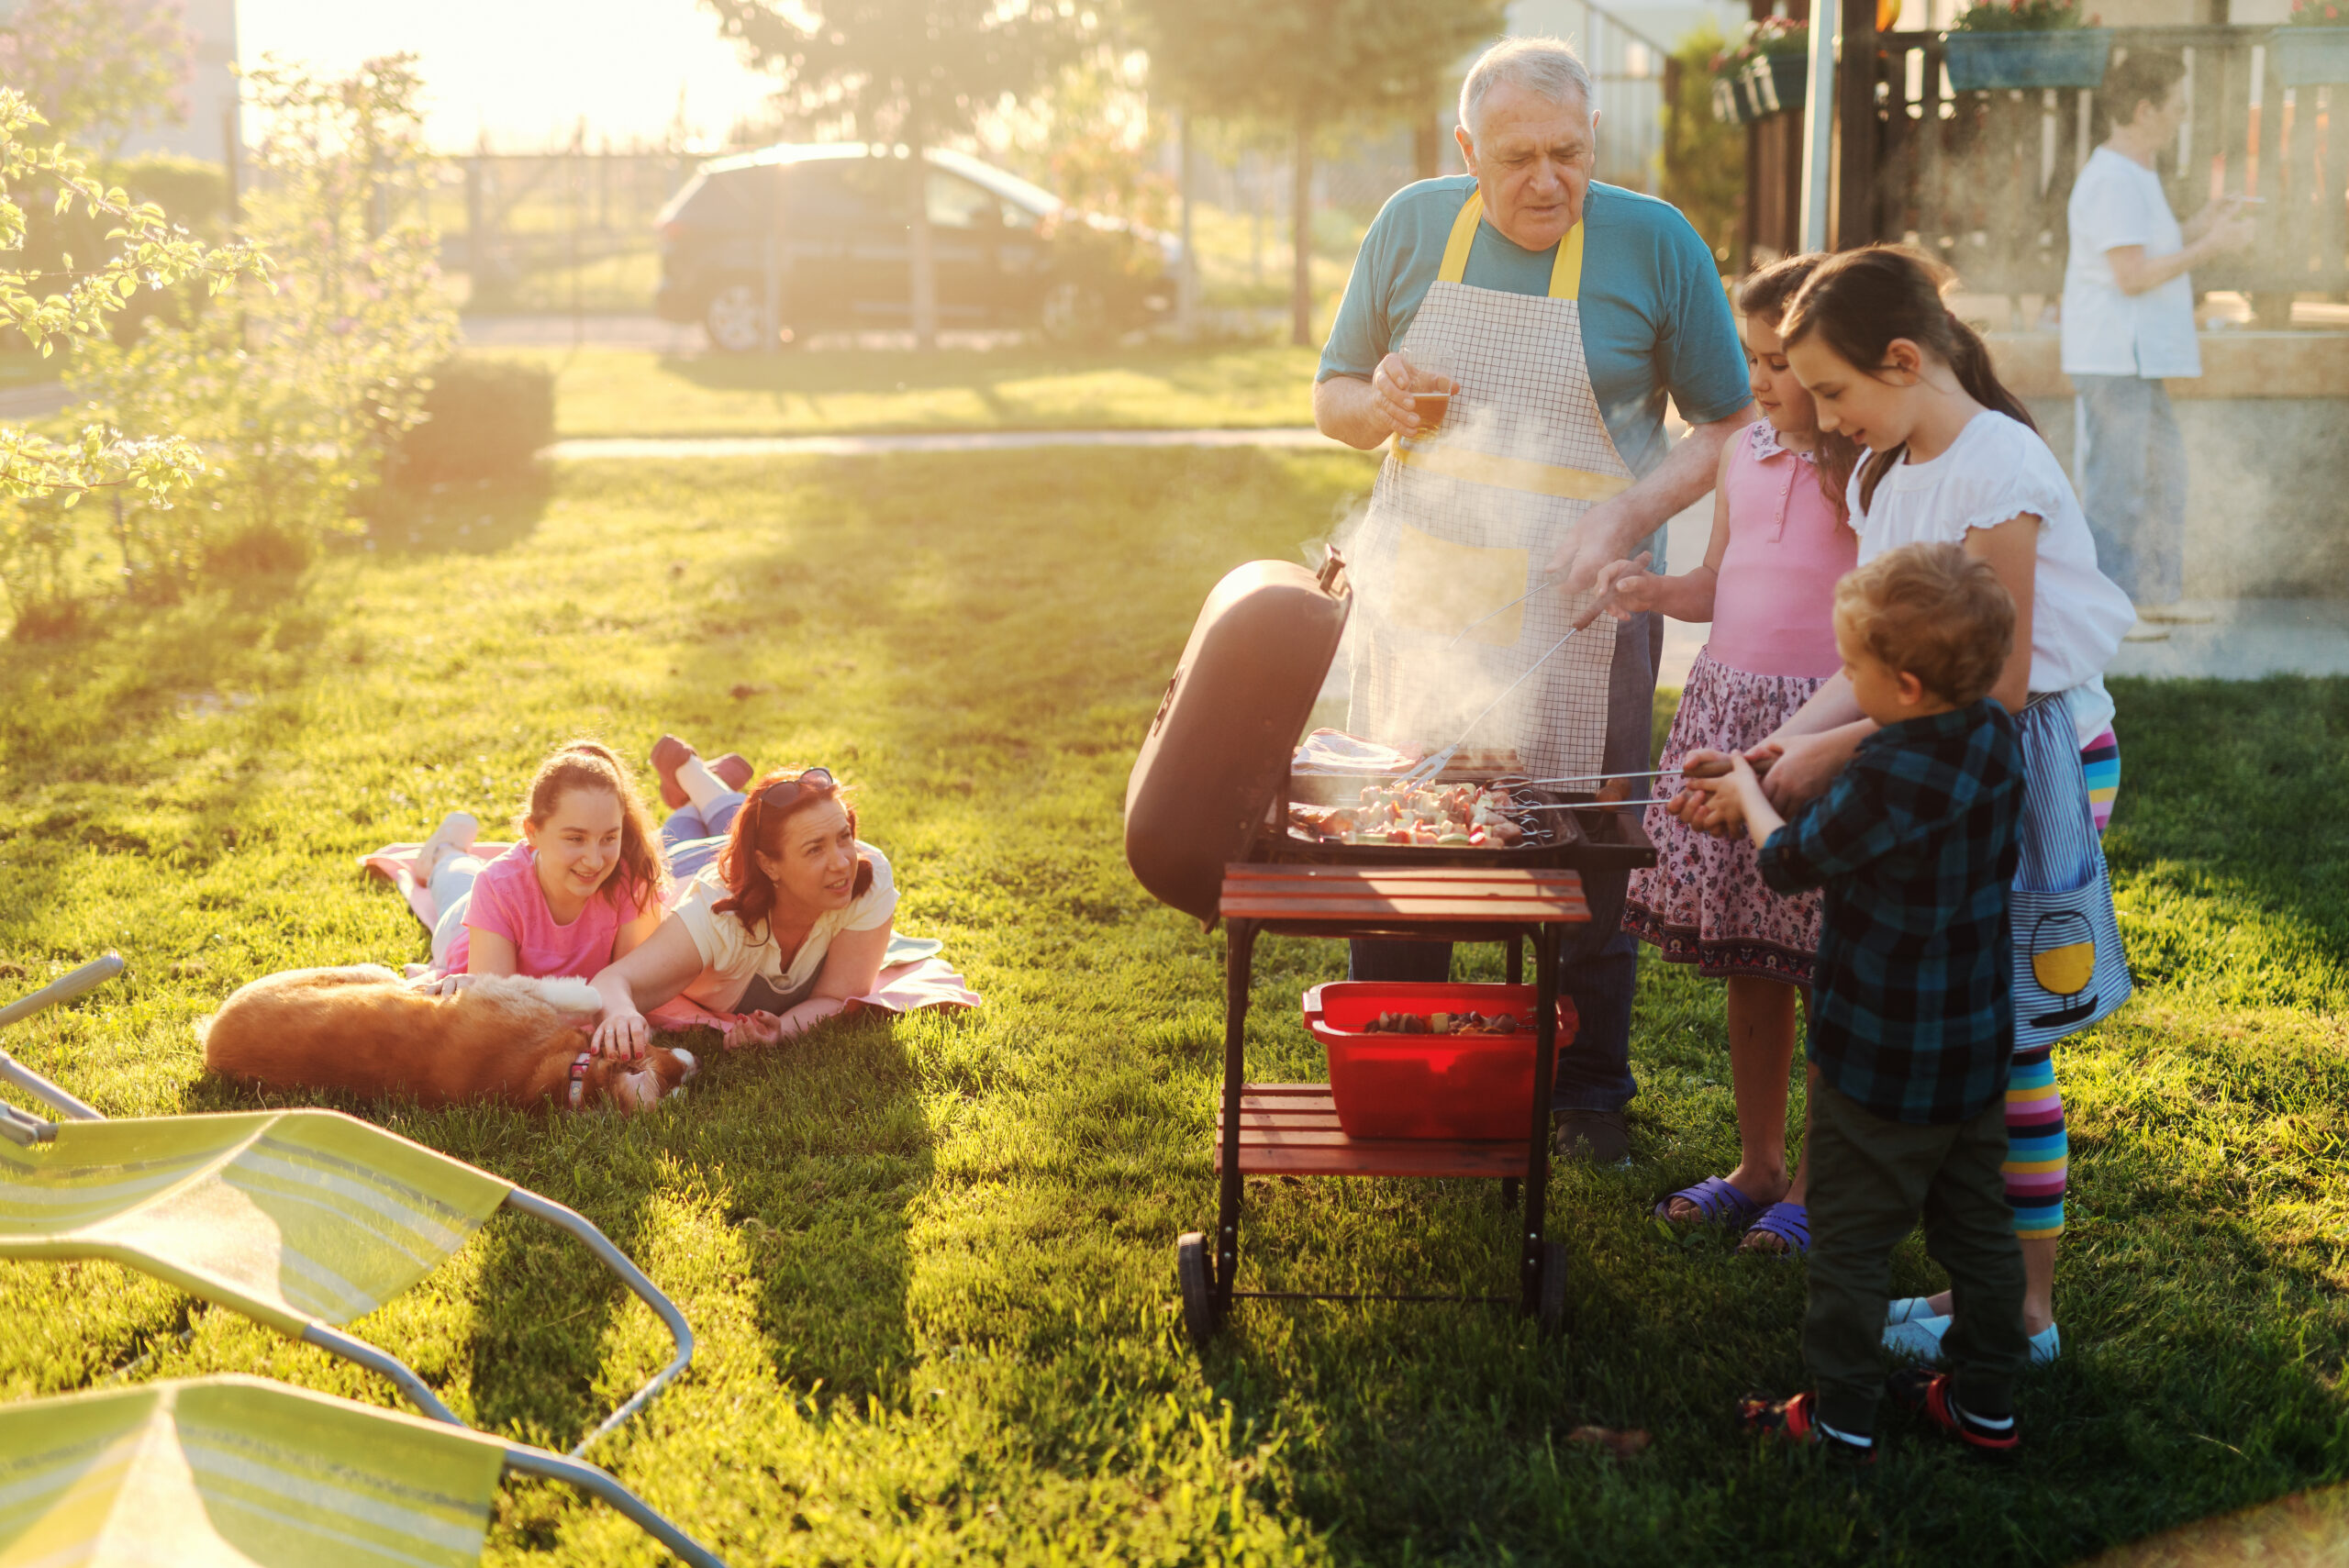 Grandfather teaches his grandchildren how to grill food at a backyard BBQ without any pesky mosquitoes